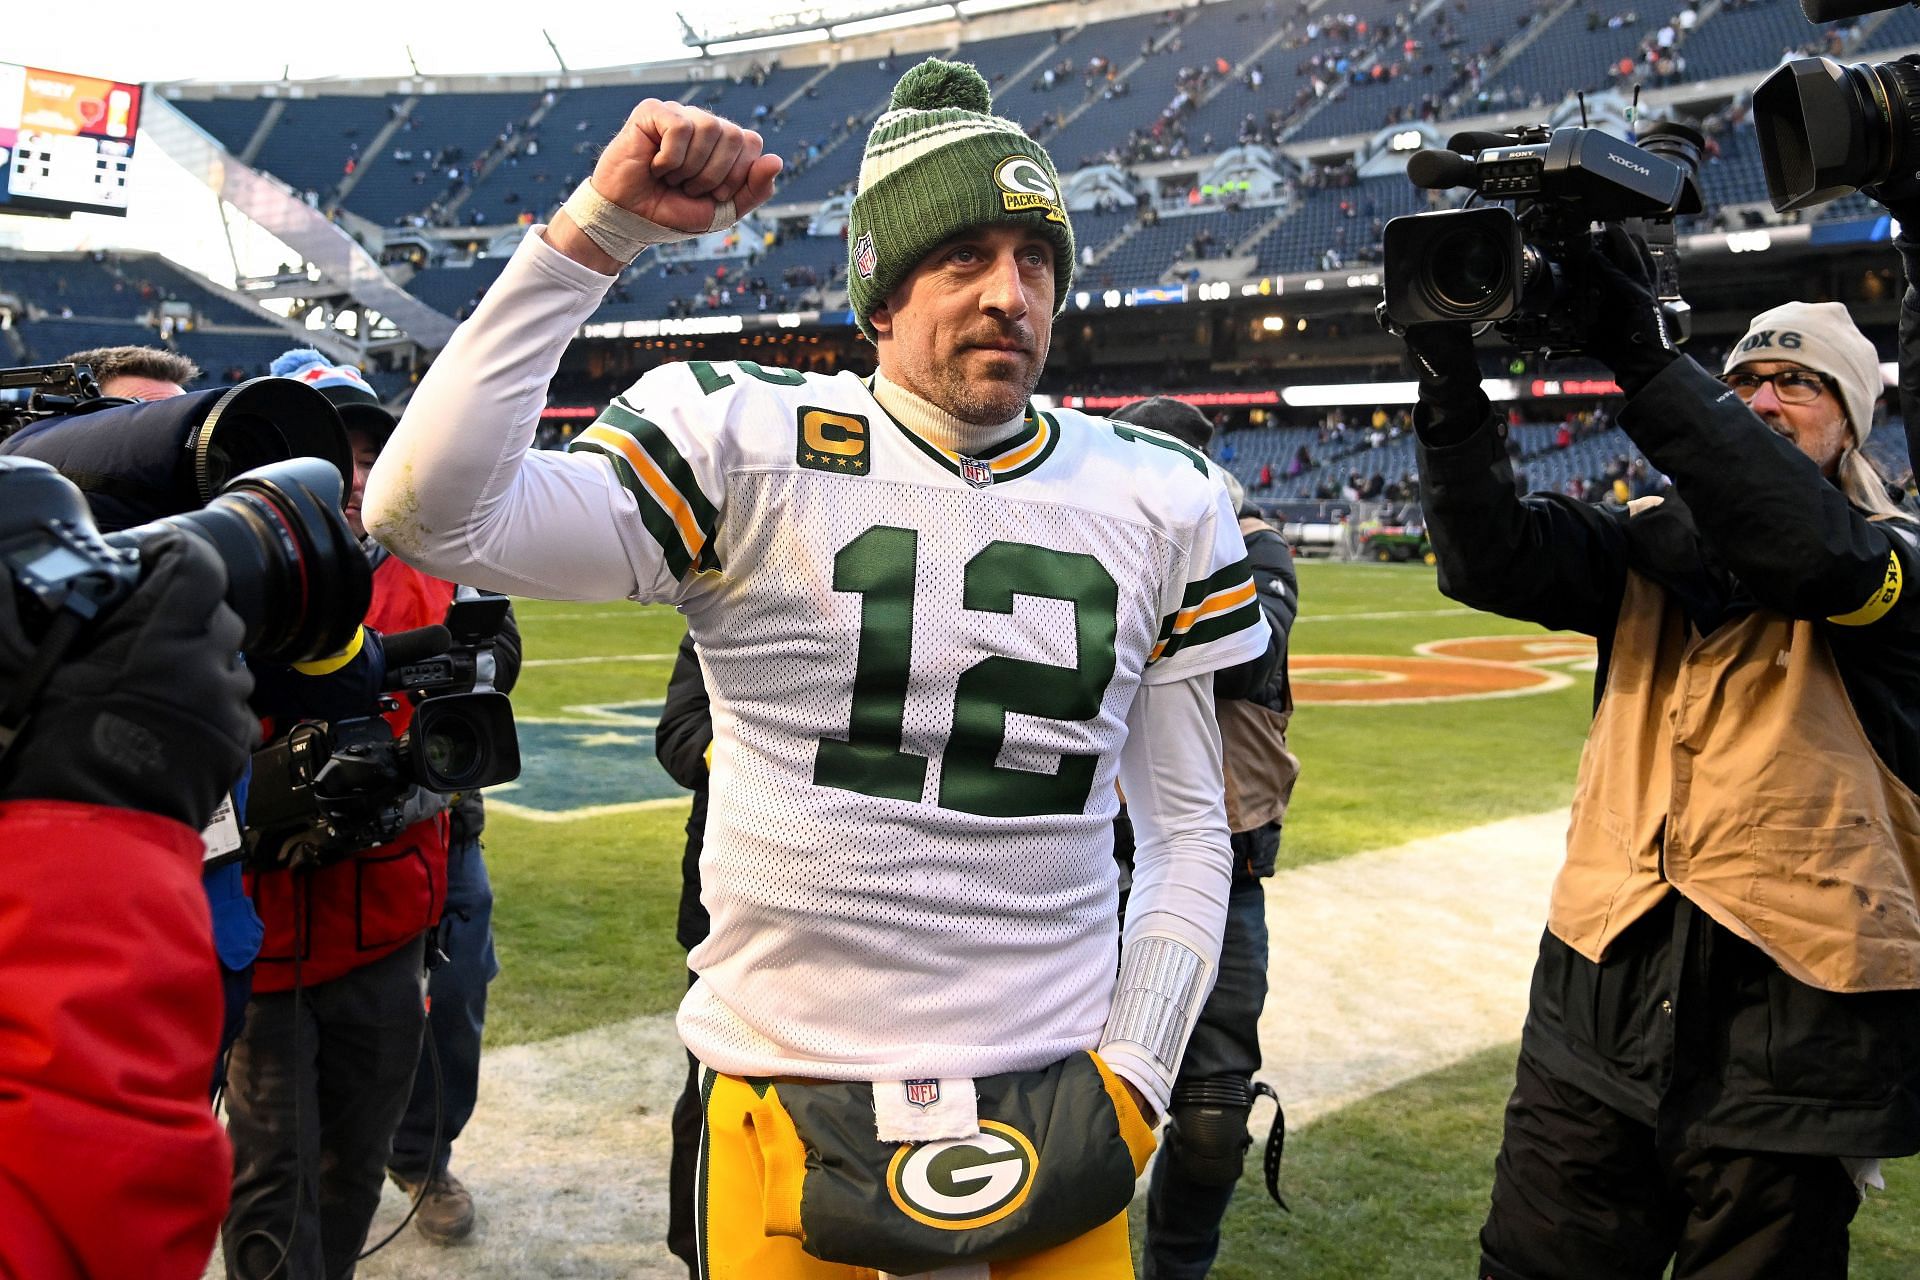 Aaron Rodgers ended his tenure Green Bay with a postseason absence